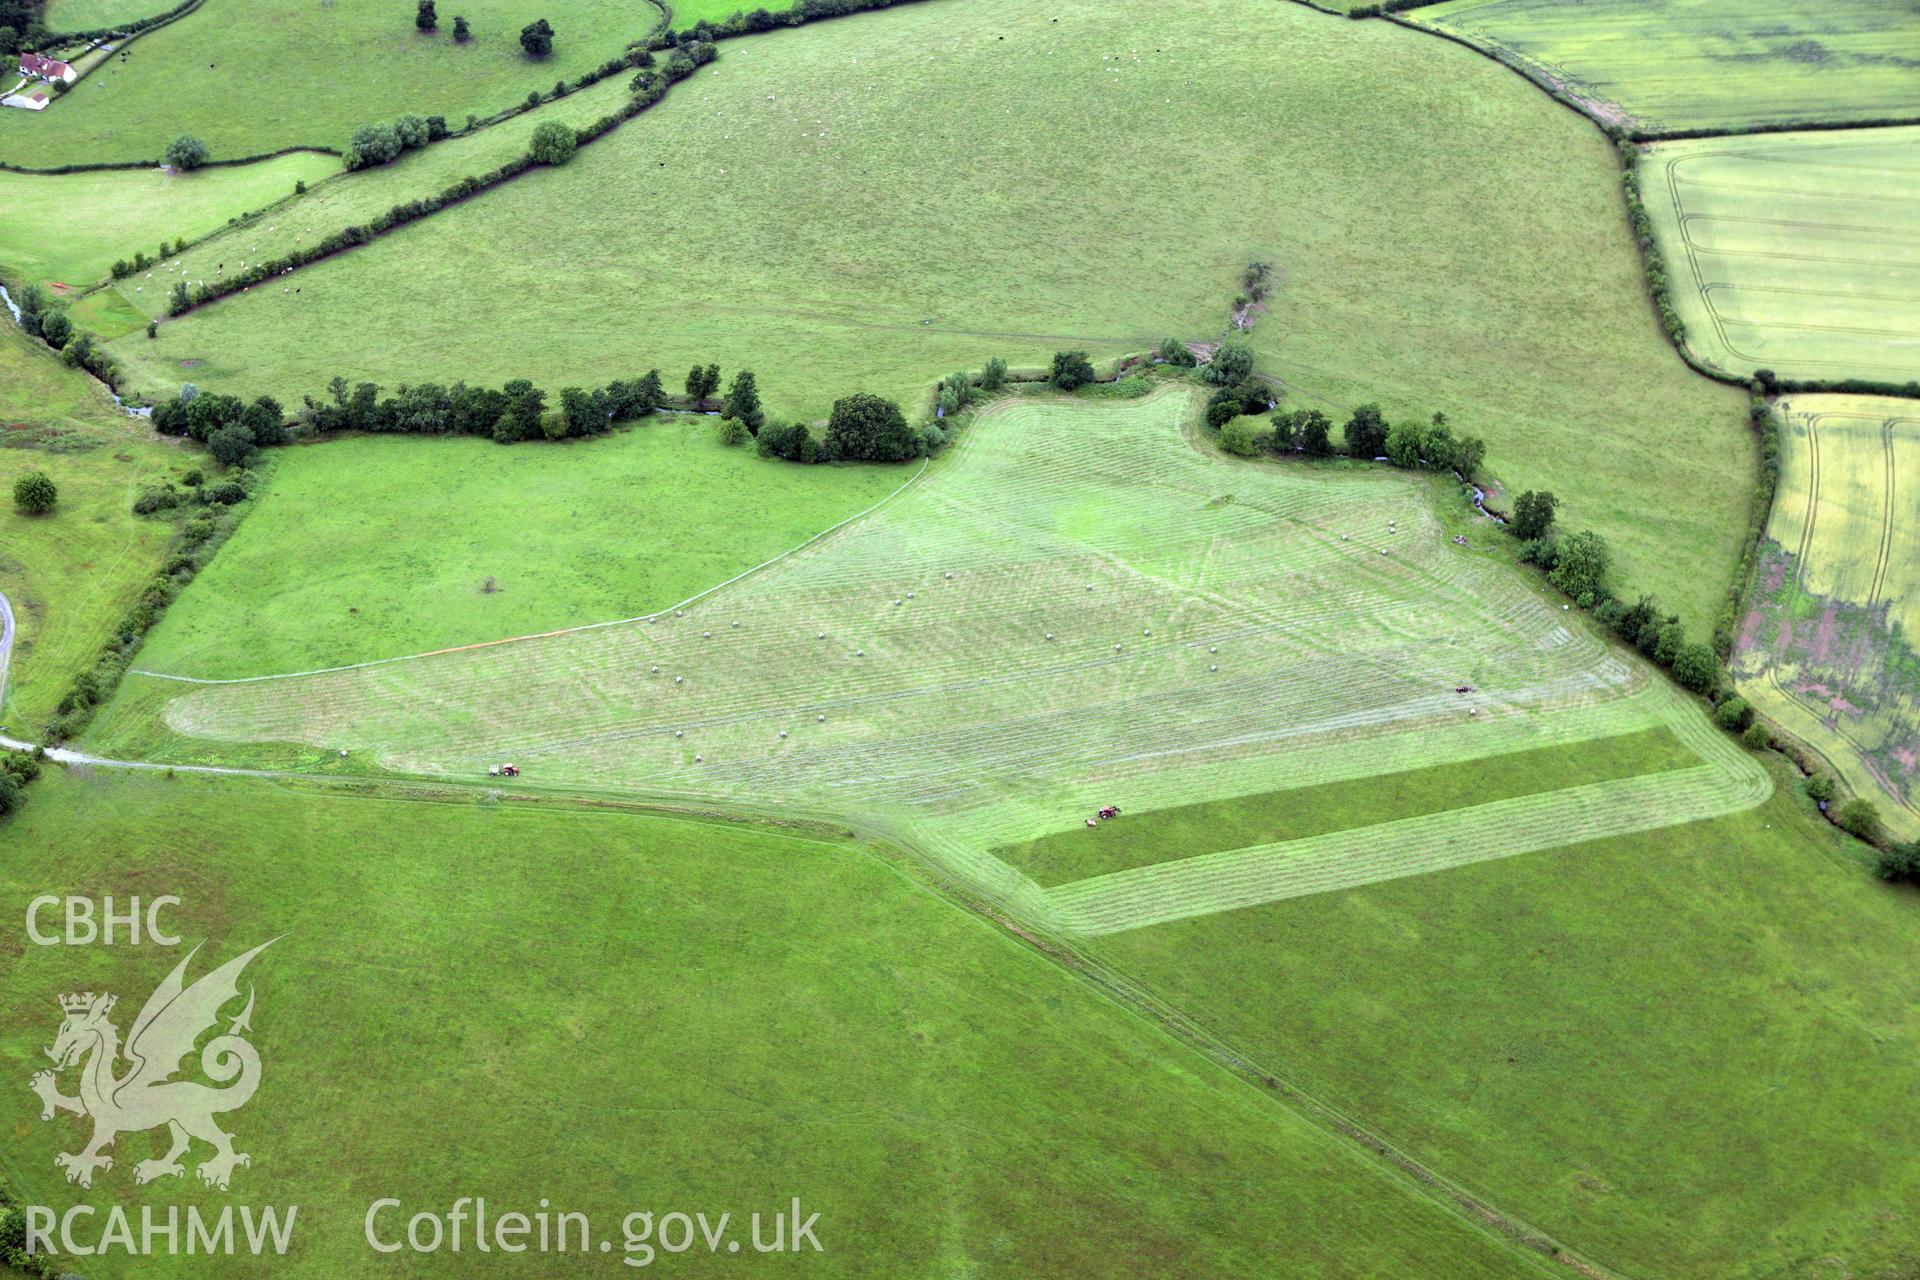 RCAHMW colour oblique aerial photograph of Monks Ditch showing cropmarks of strip field systems. Taken on 09 July 2009 by Toby Driver